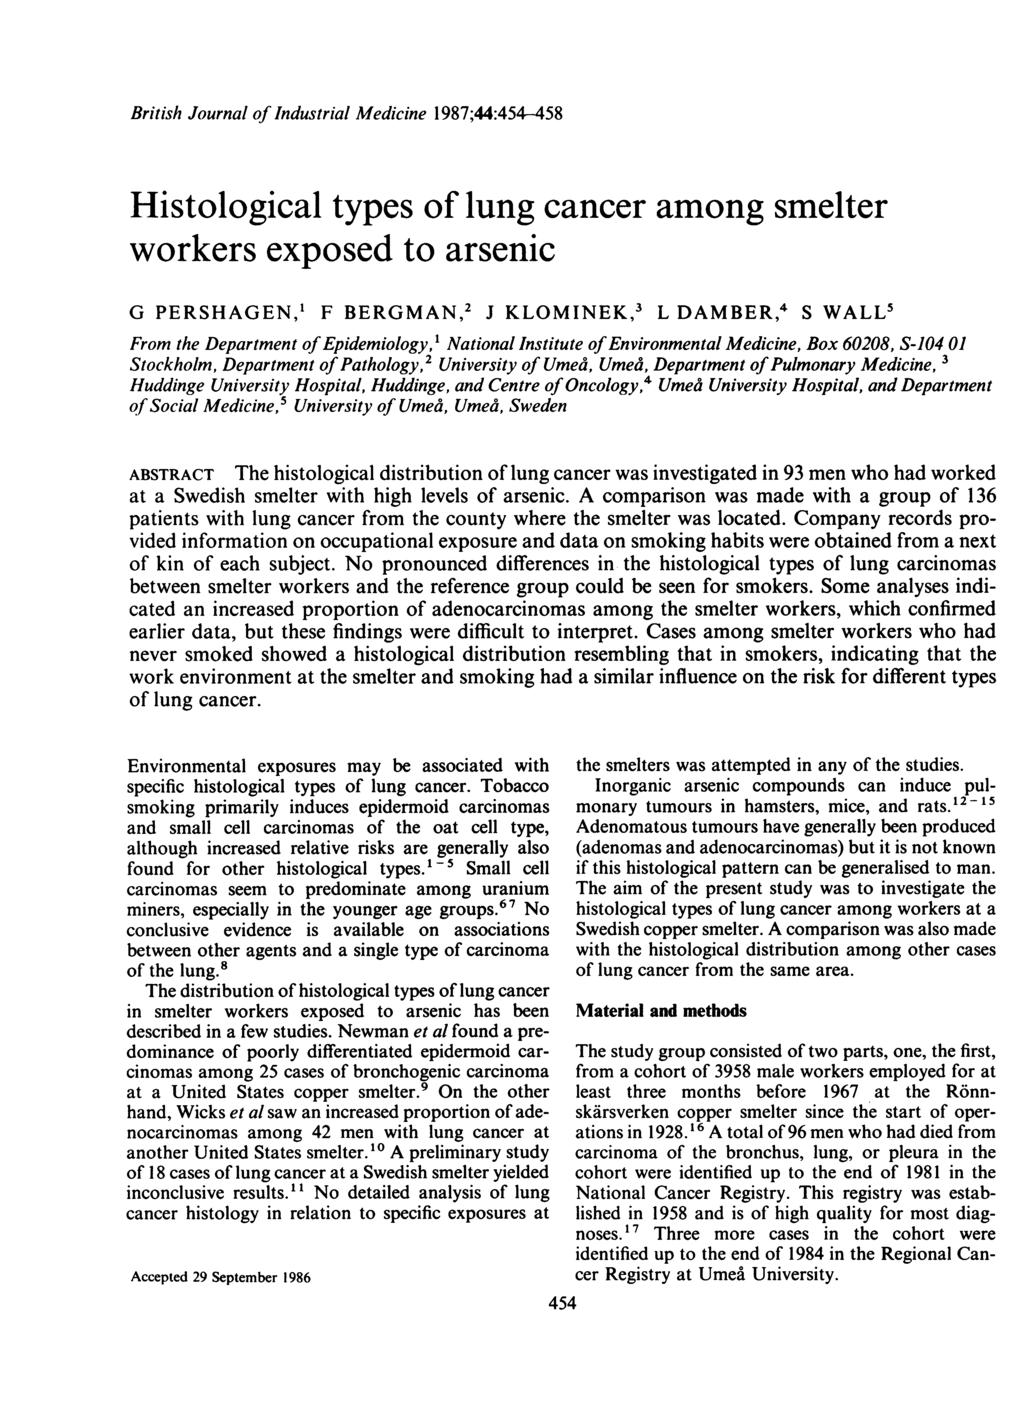 British Journal of Industrial Medicine 1987;44:454-458 Histological types of lung cancer among smelter workers exposed to arsenic G PERSHAGEN,' F BERGMAN,2 J KLOMINEK,3 L DAMBER,4 S WALL5 From the